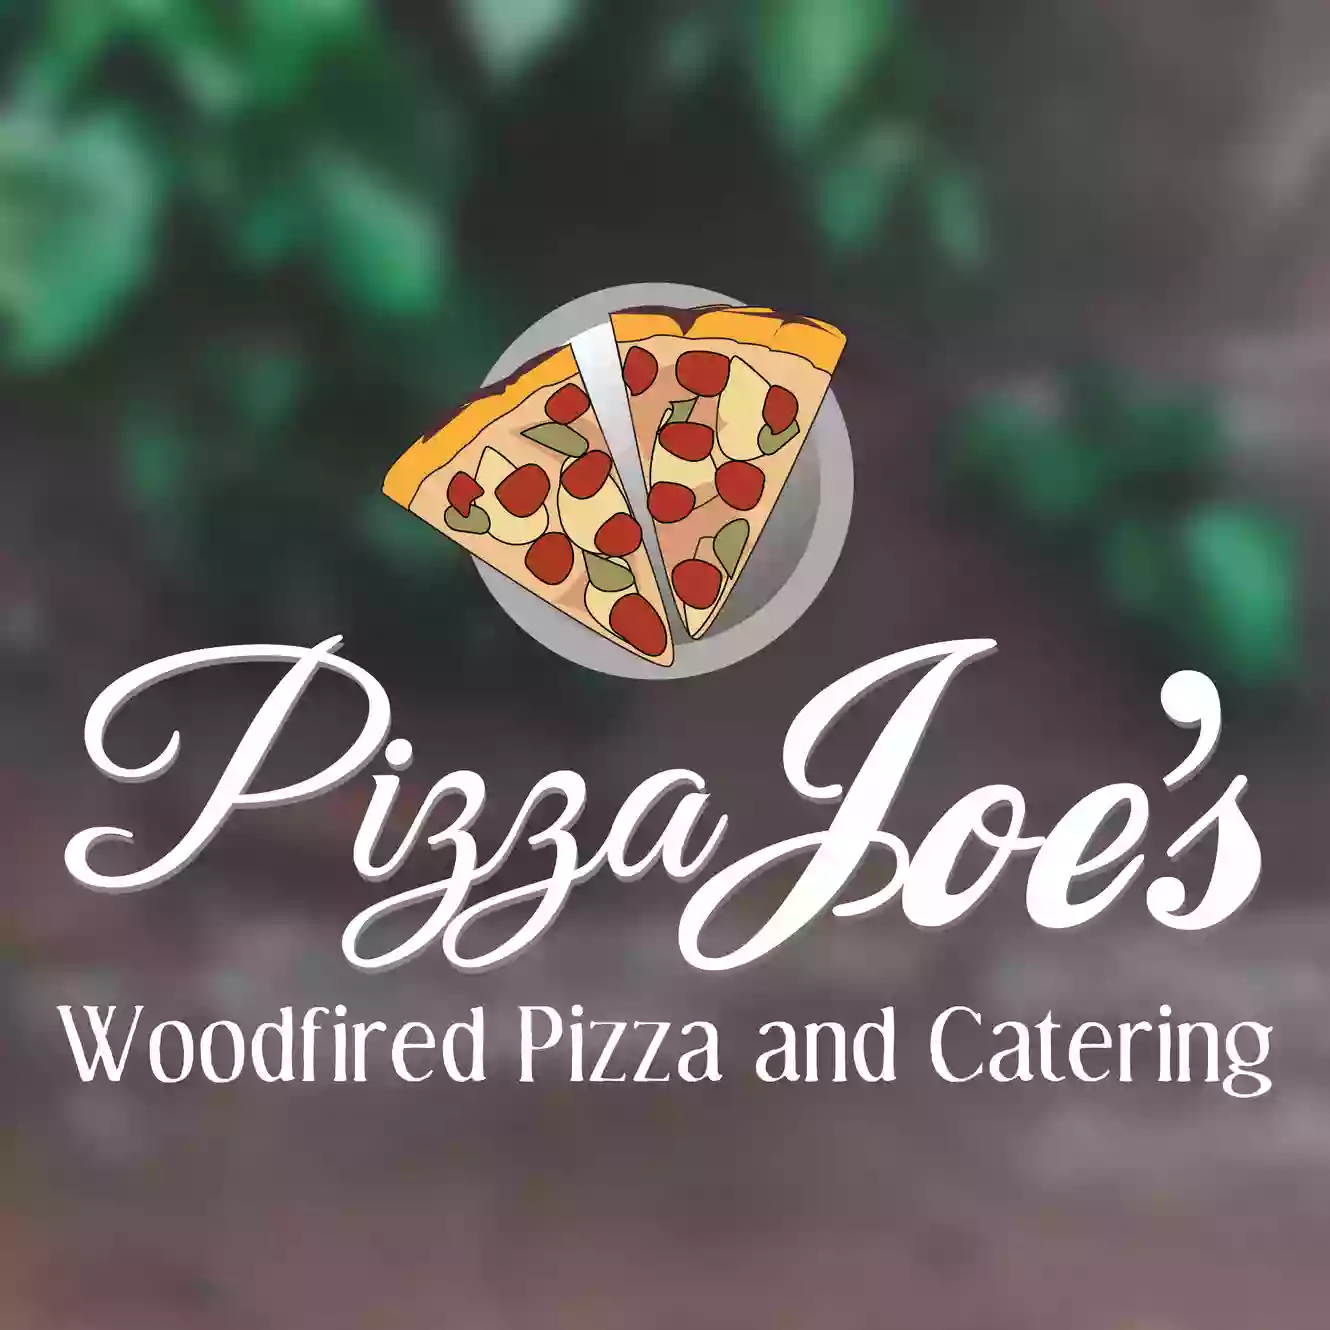 Pizza Joes Woodfired Pizza